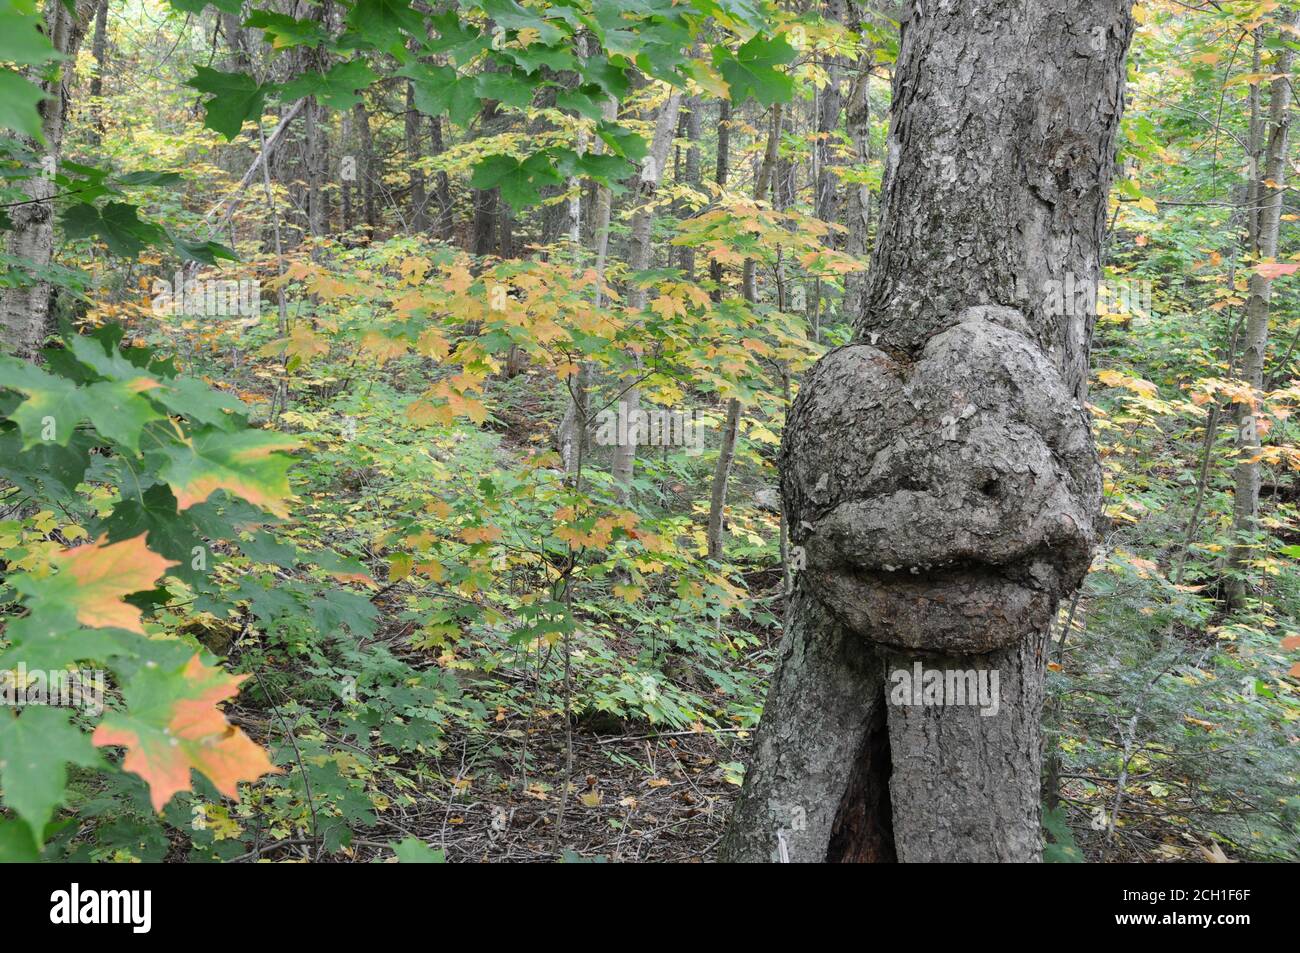 Tree with smiling human face in nature with a majestic illusion in forest, a rarity and amazing phenomena. Stock Photo